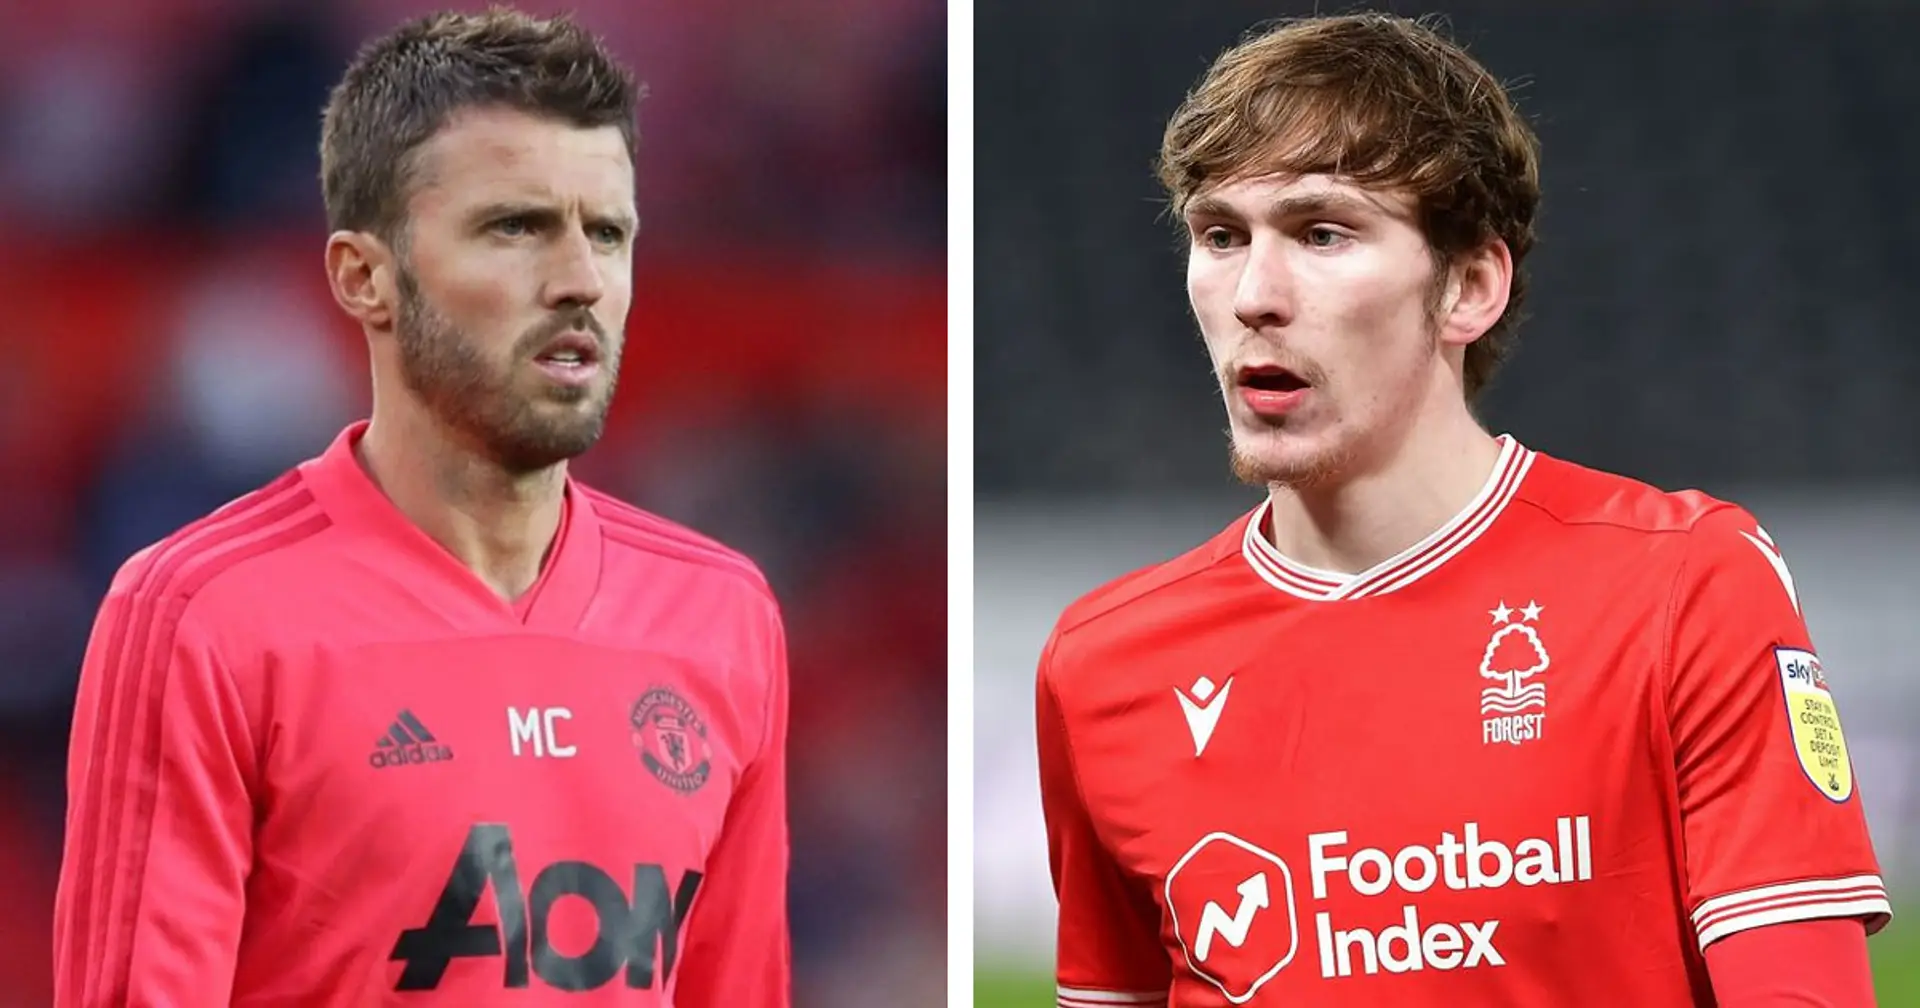 ‘Some of the basic things are hardest to do’: Garner reveals how Michael Carrick’s advice helped him improve